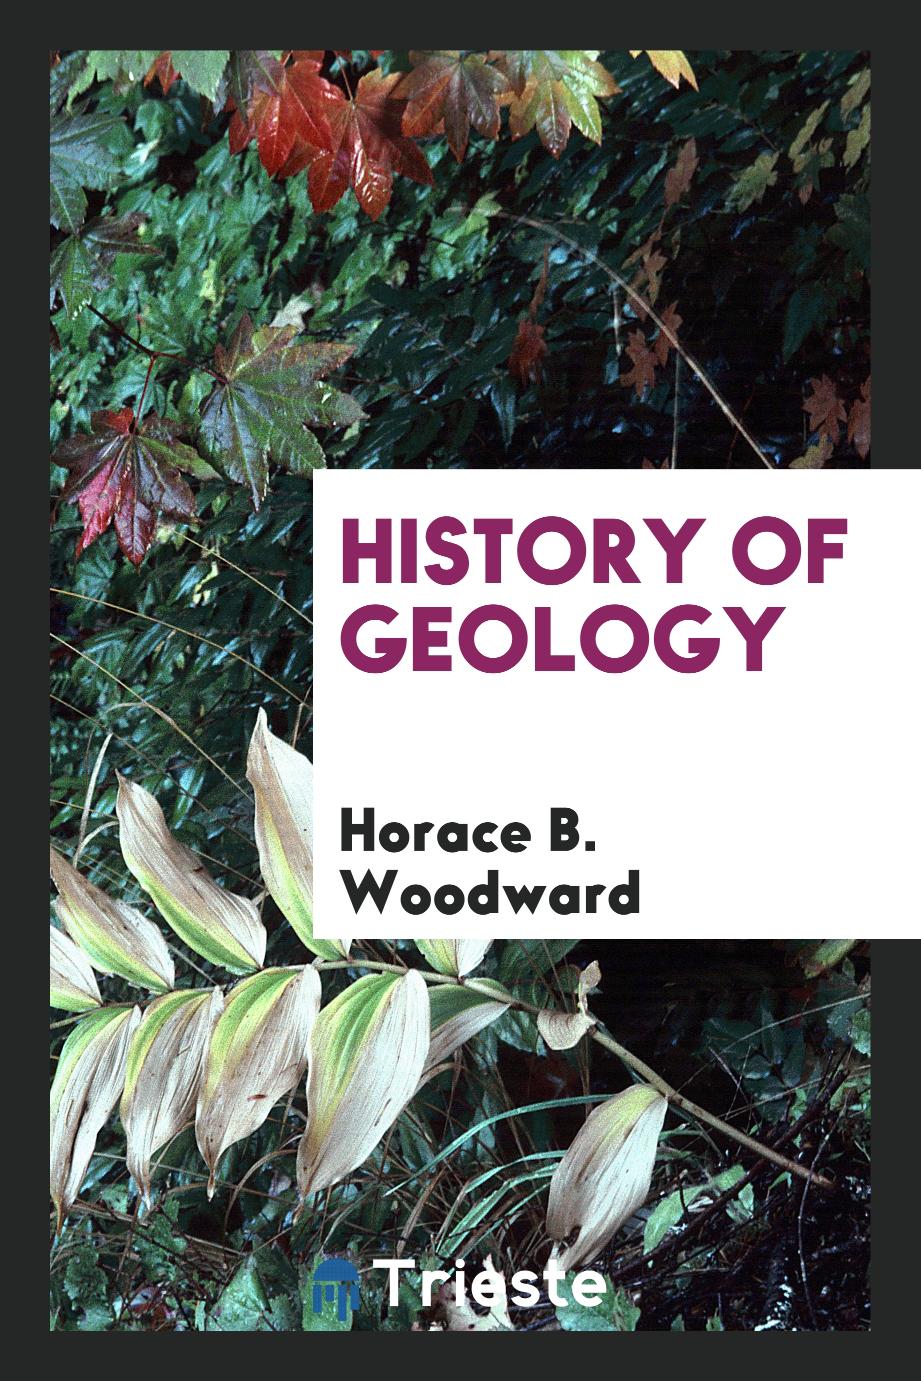 History of geology